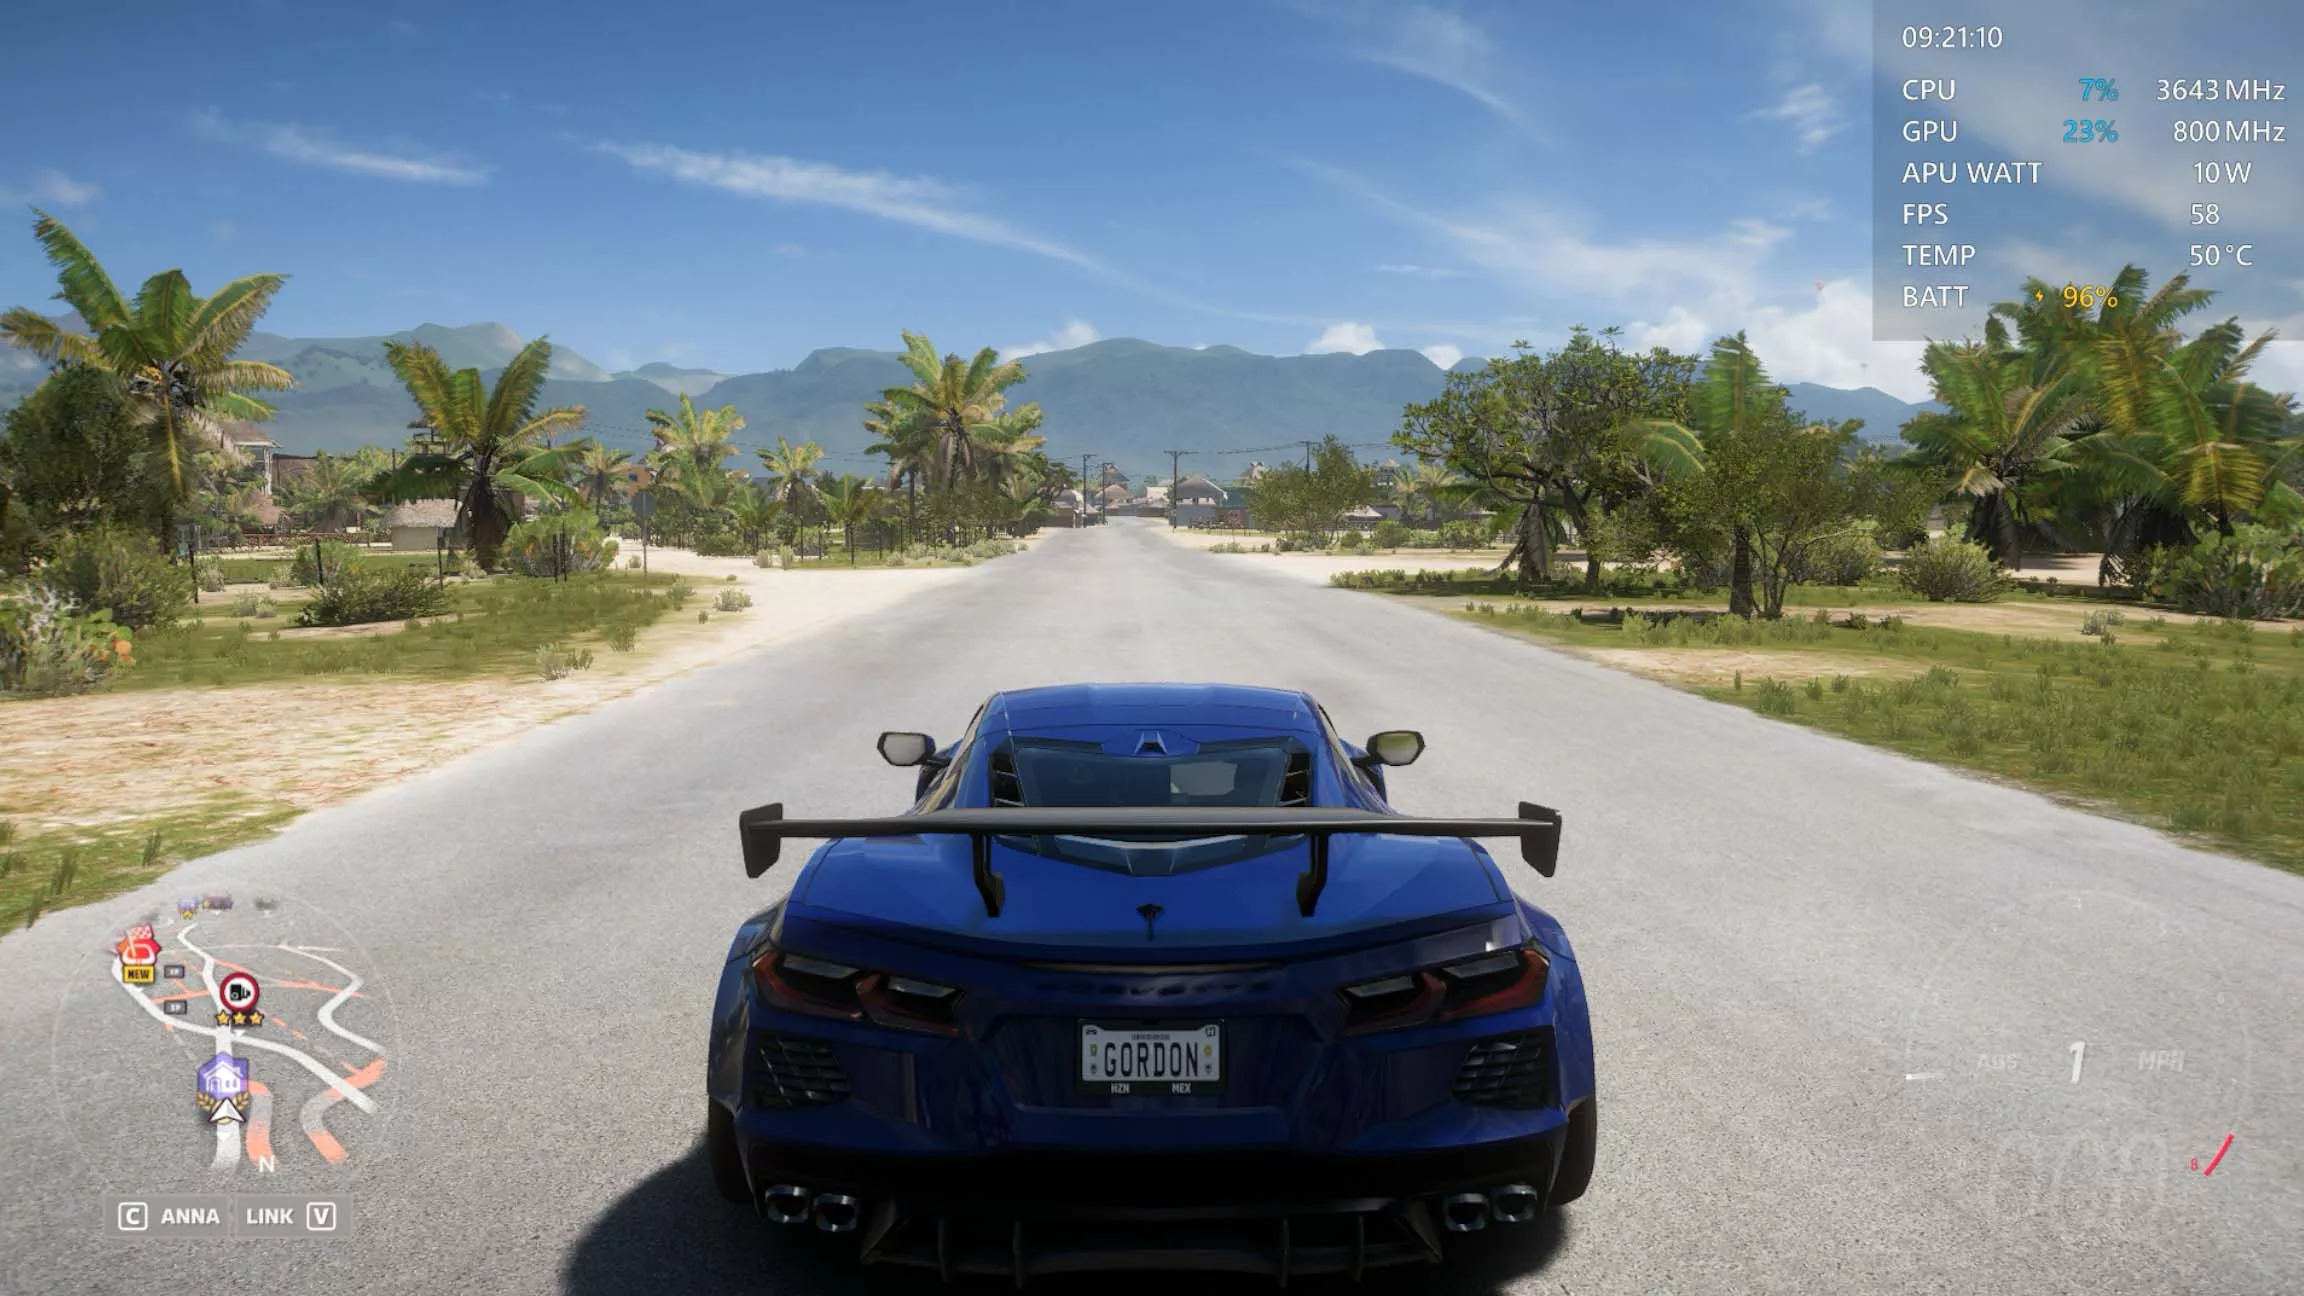 A video game screenshot of a car on a road with performance metrics in the upper corner of the screen.